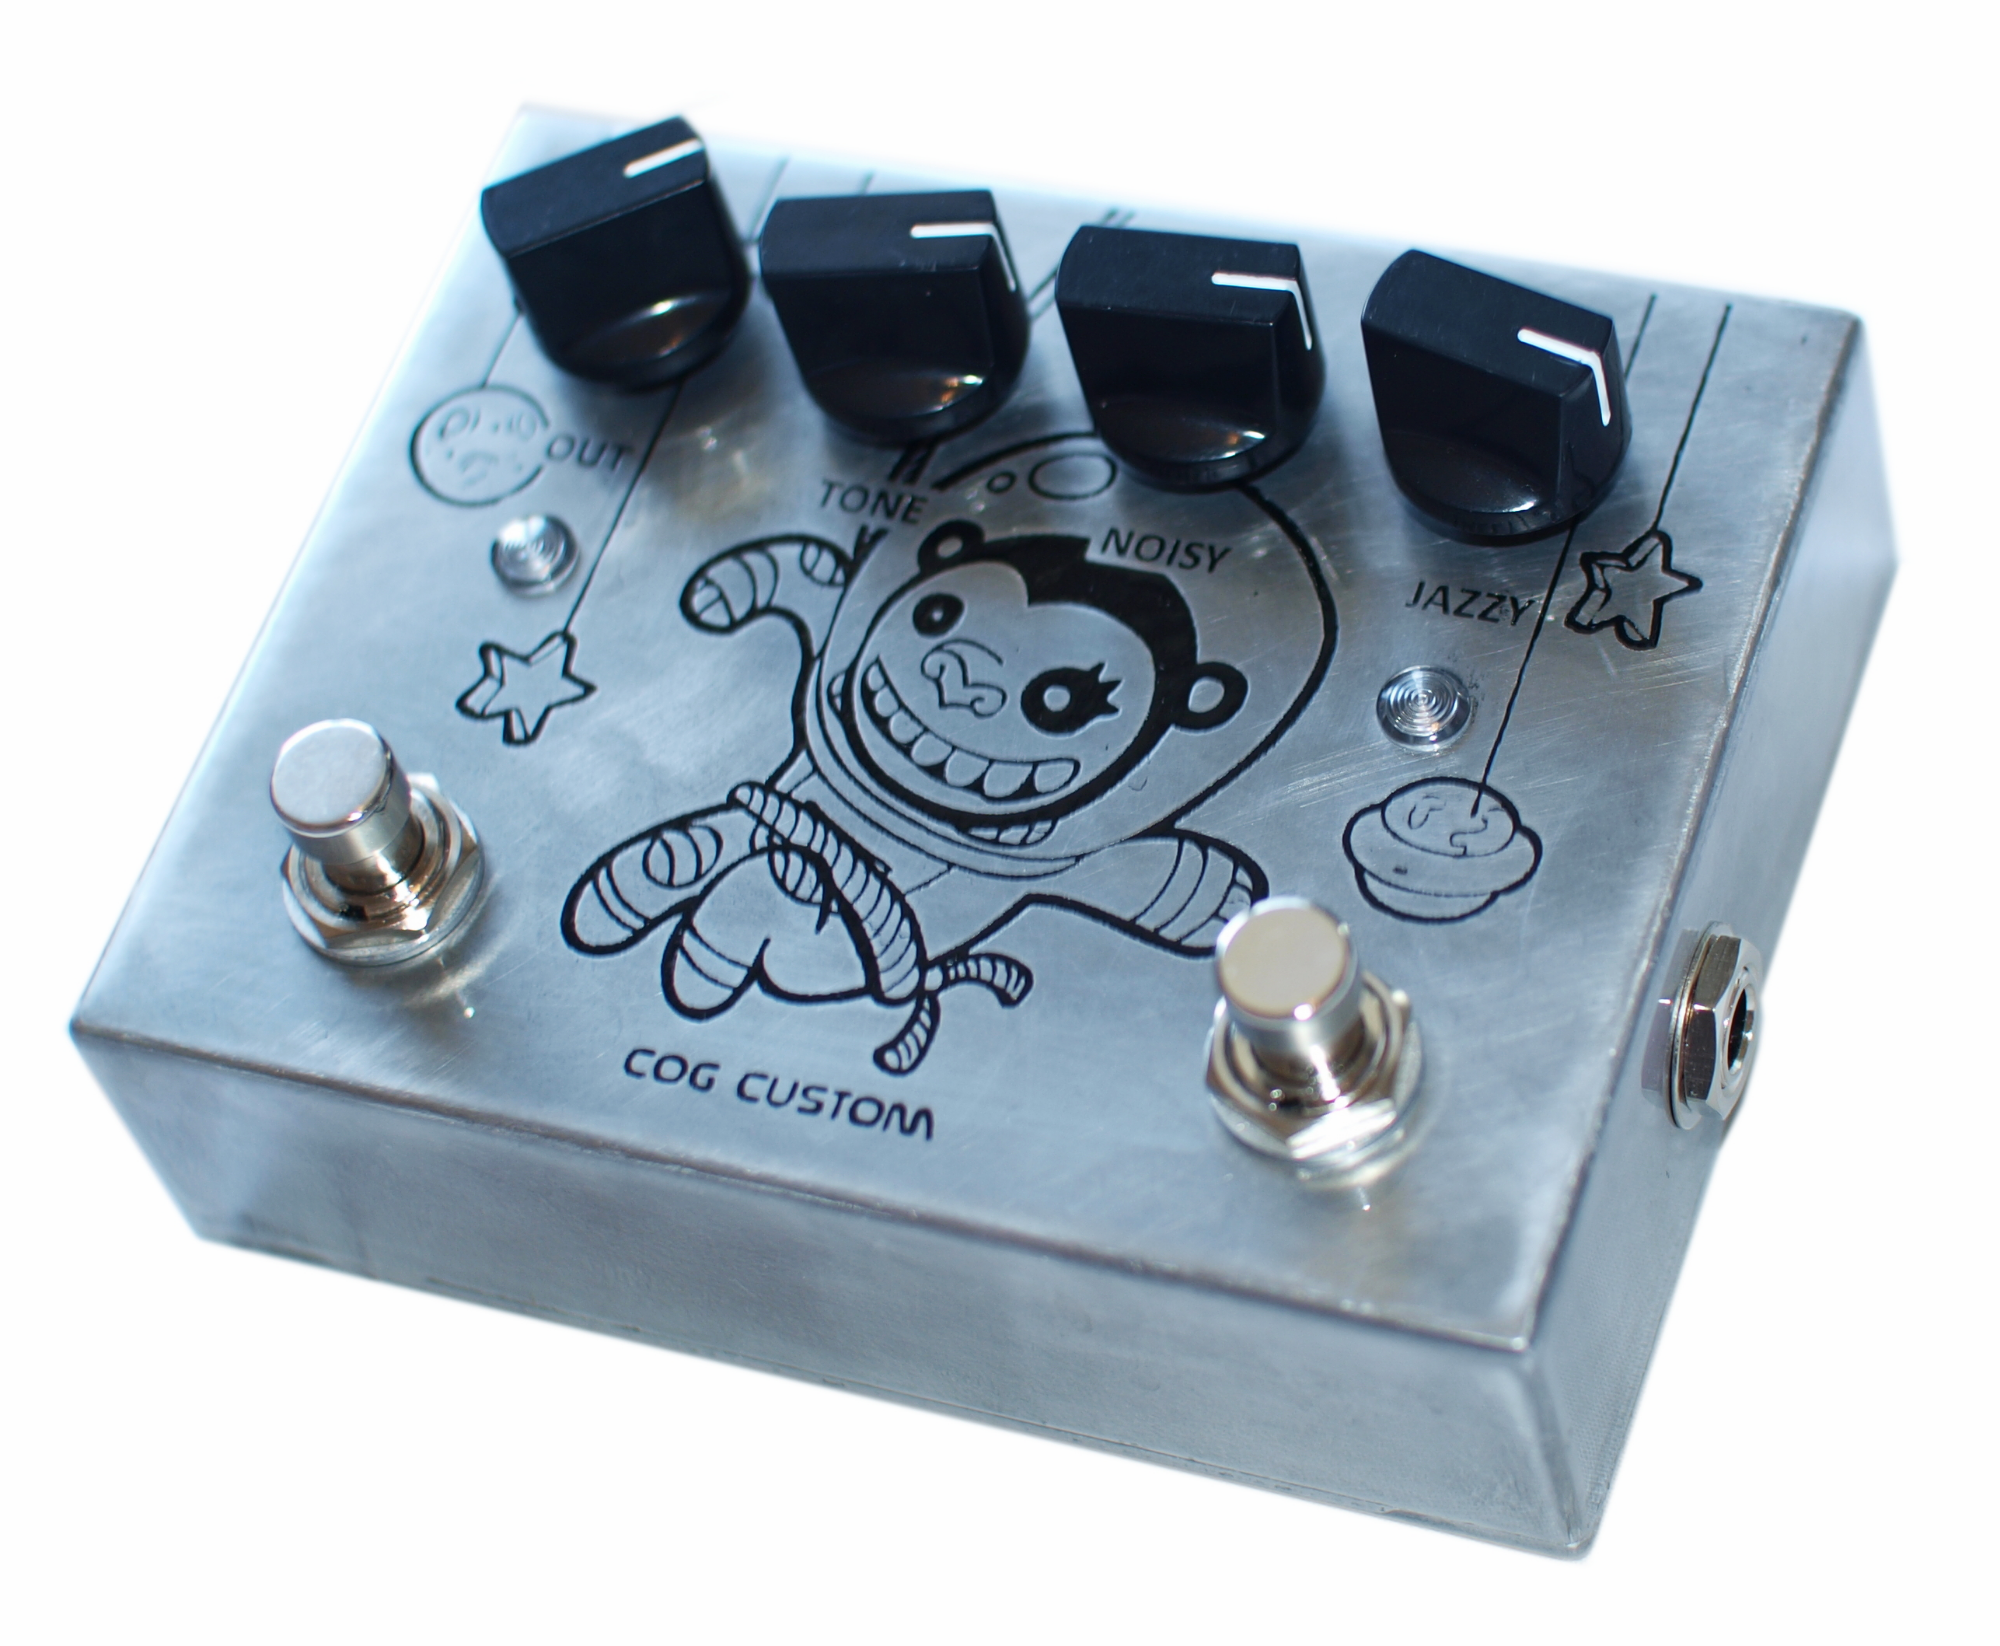 Cog Custom - Custom Effects Pedal - Disastrochimp two-channel Knightfall Distortion - Etched Enclosure